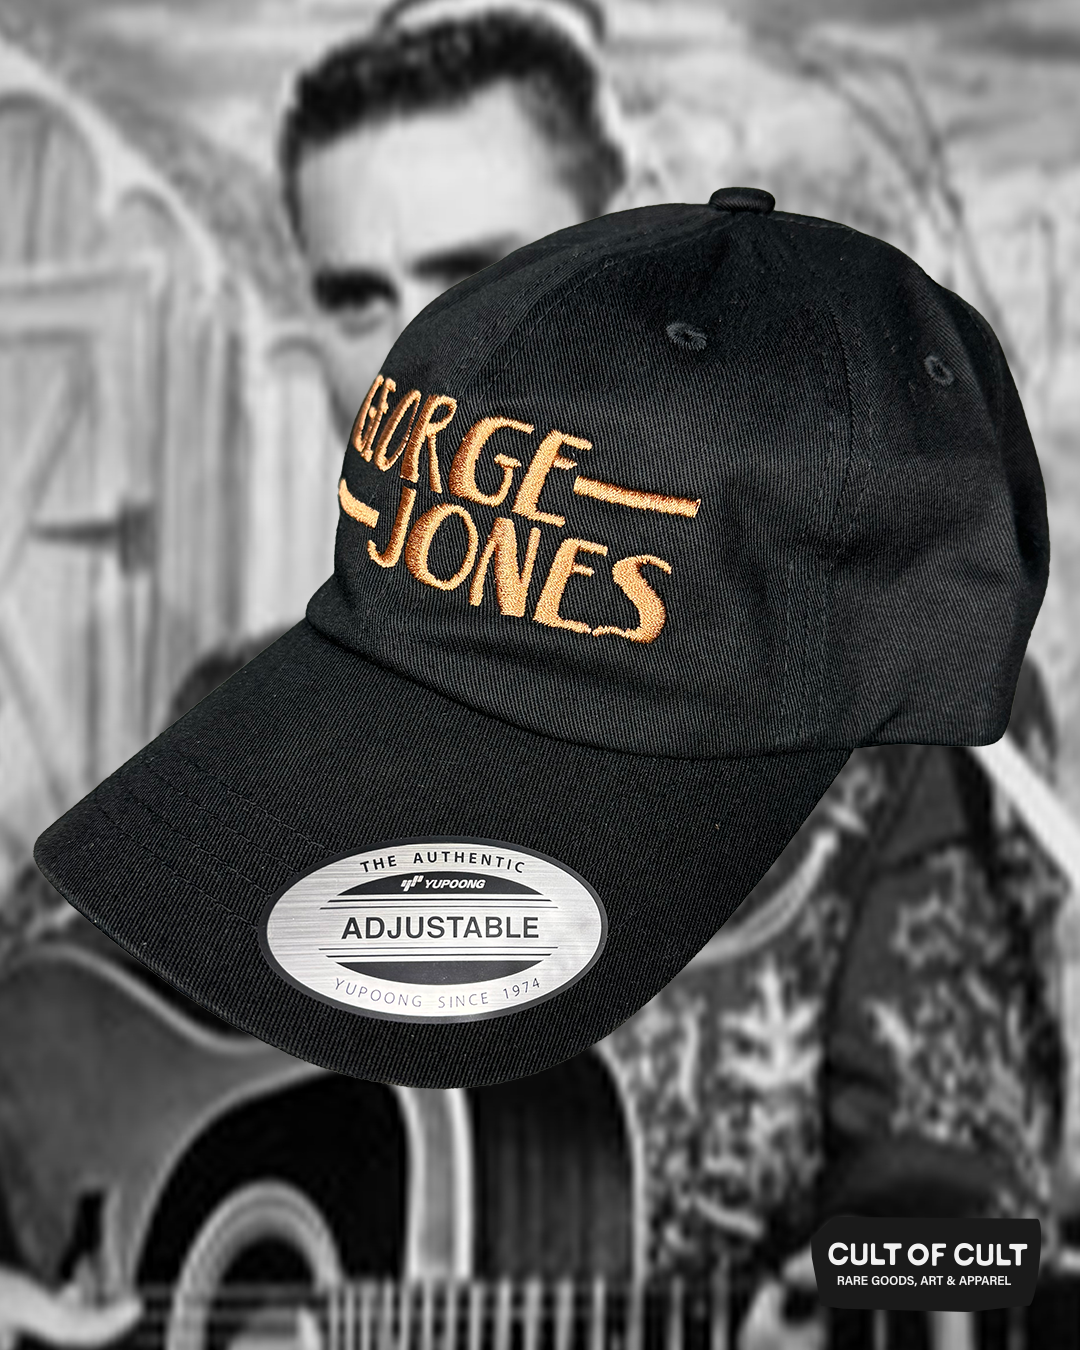 the side view of the George Jones black dad hat